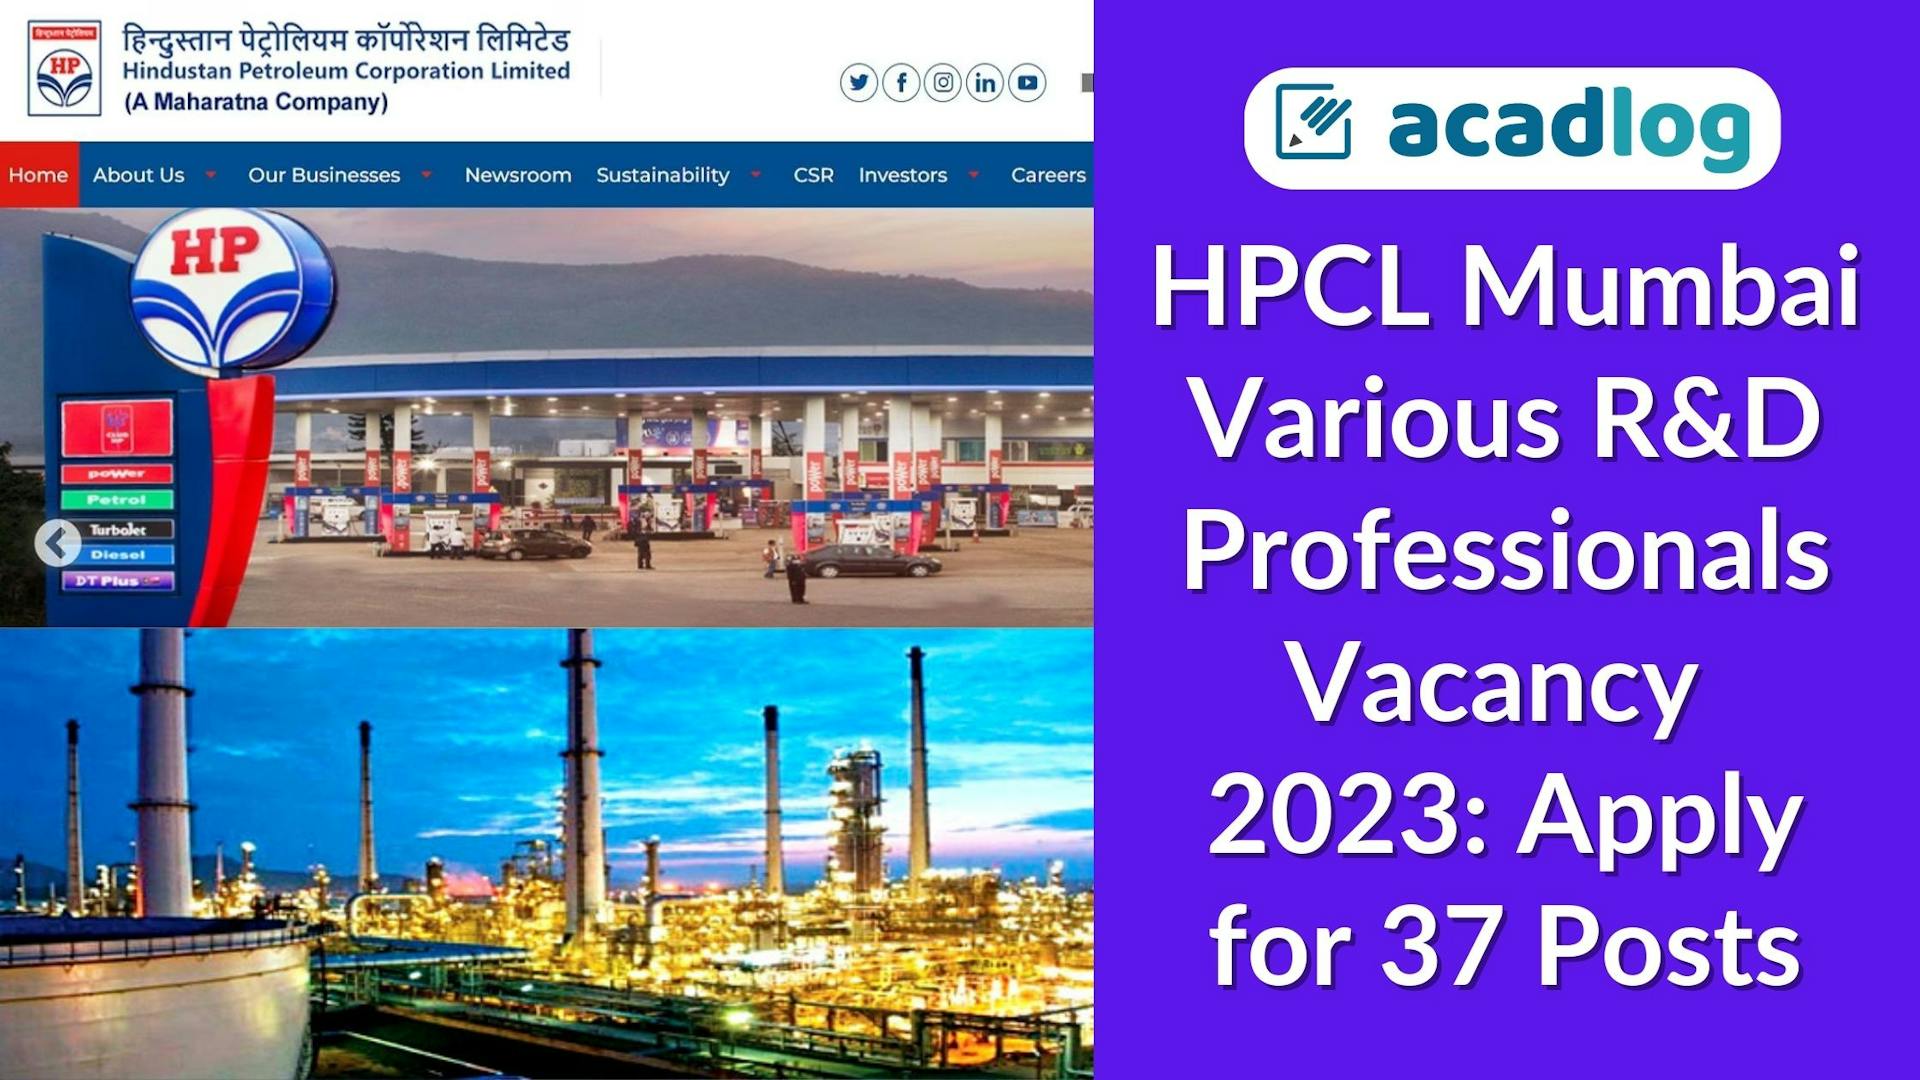 HPCL Mumbai Various R&D Professionals Vacancy 2023: Apply for 37 Posts